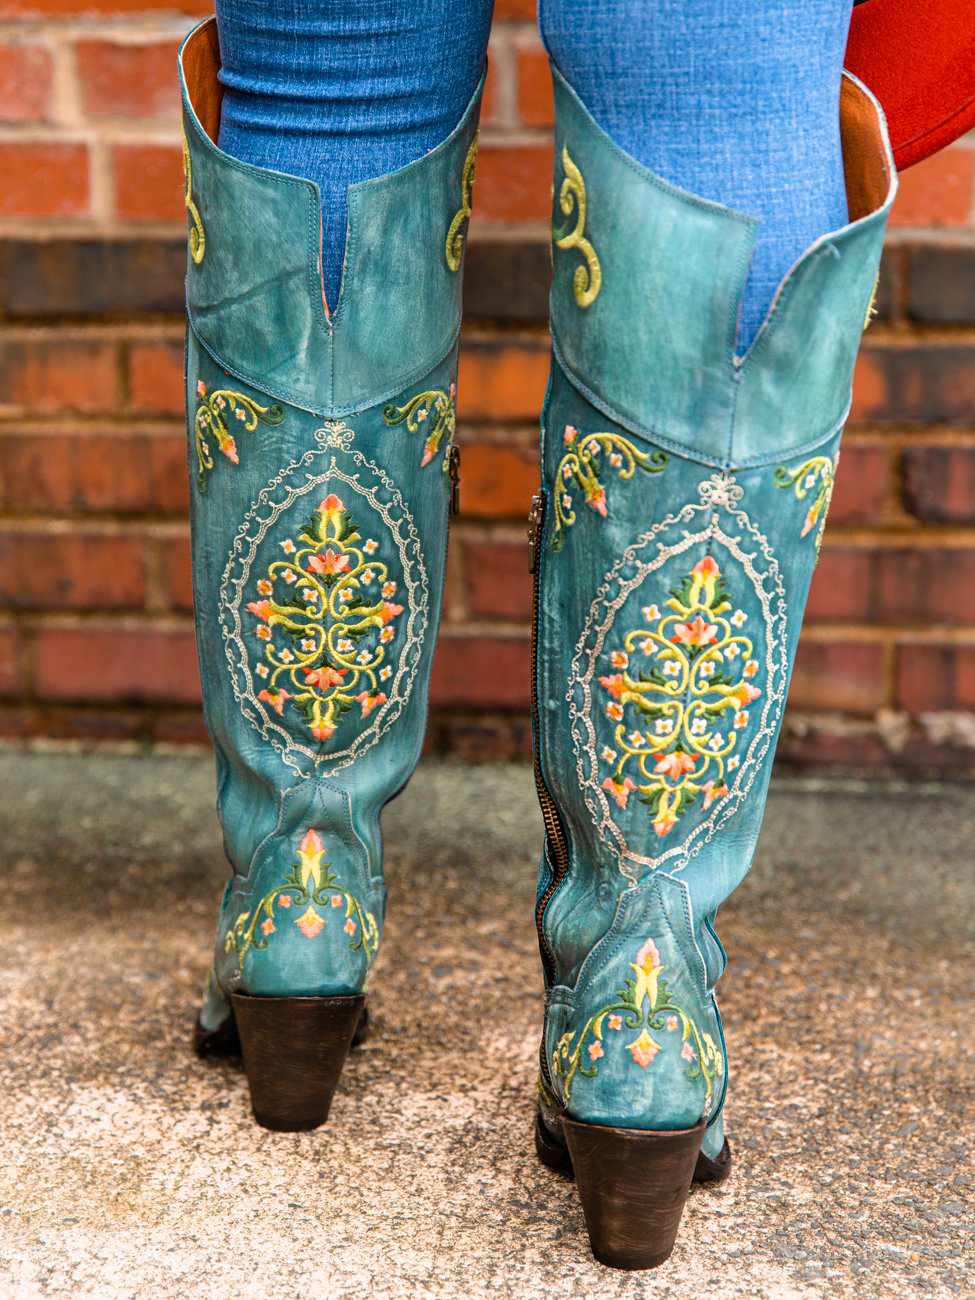 Flower Child Boots-Boots-Southern Fried Chics